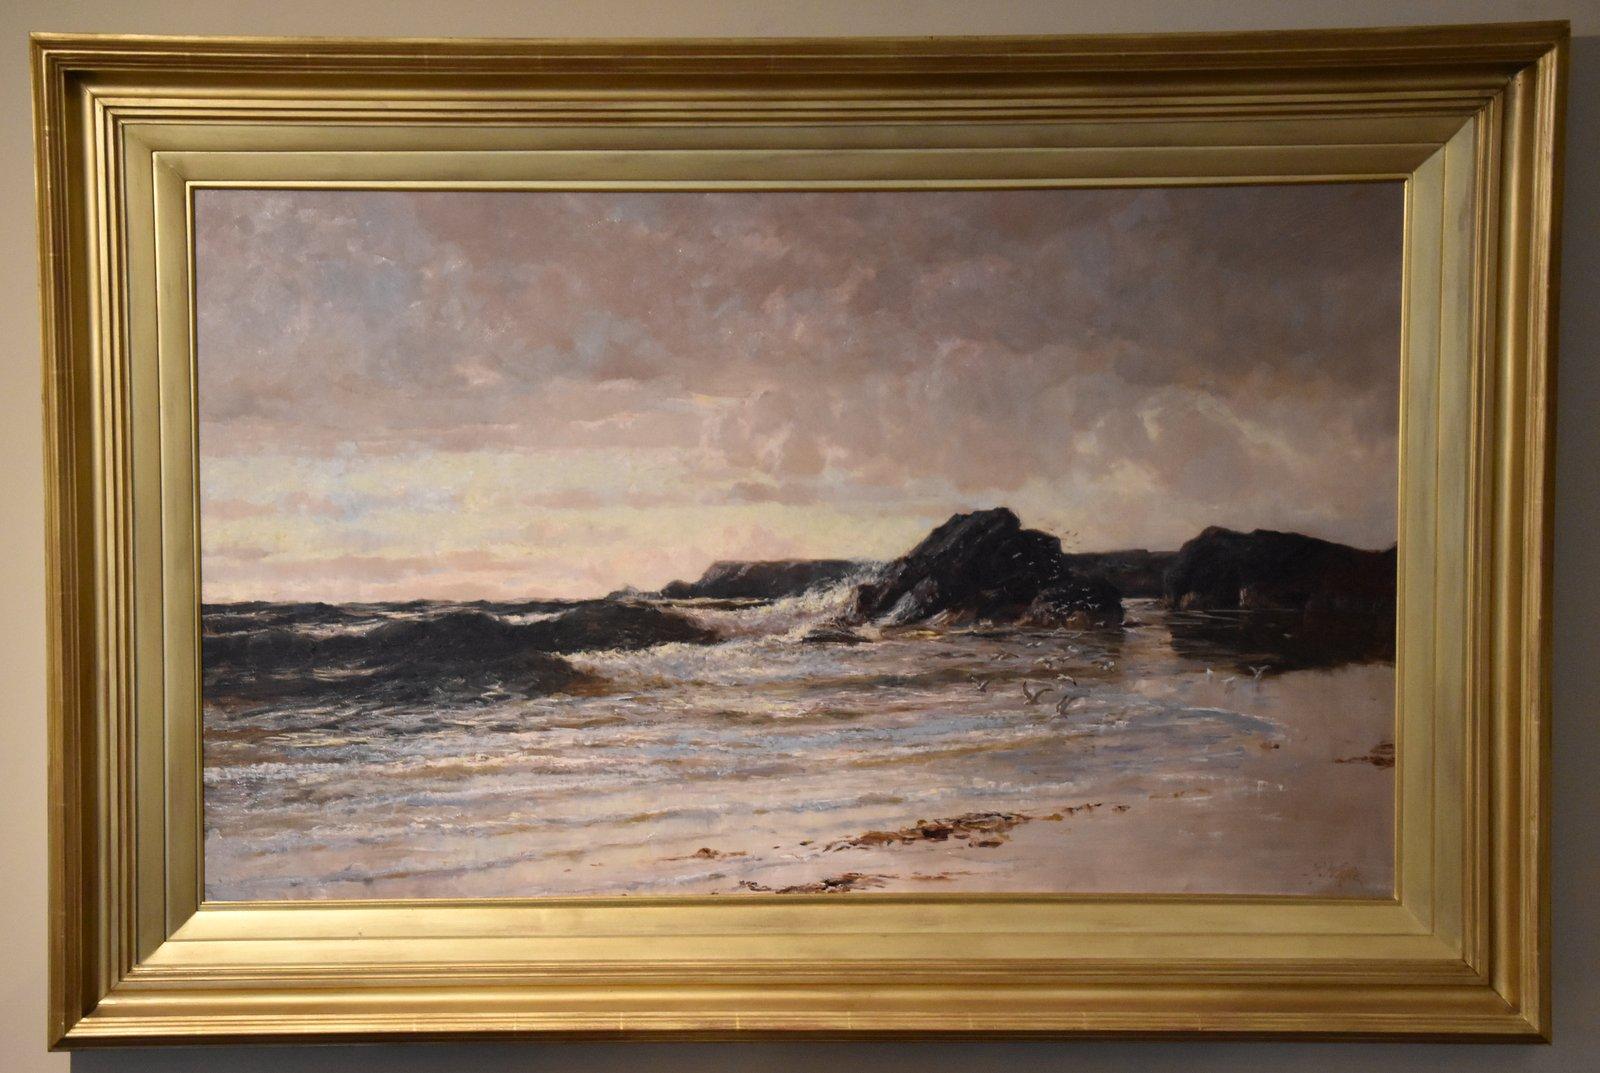 Oil Painting by Richard Wane "Breaking Waves" 1852 - 1904 marine painter who studied at the Manchester academy and was president of the Liverpool sketching club. Regular exhibitor. Oil on canvas. Signed with provenance. The Randolph Hotel Oxford.